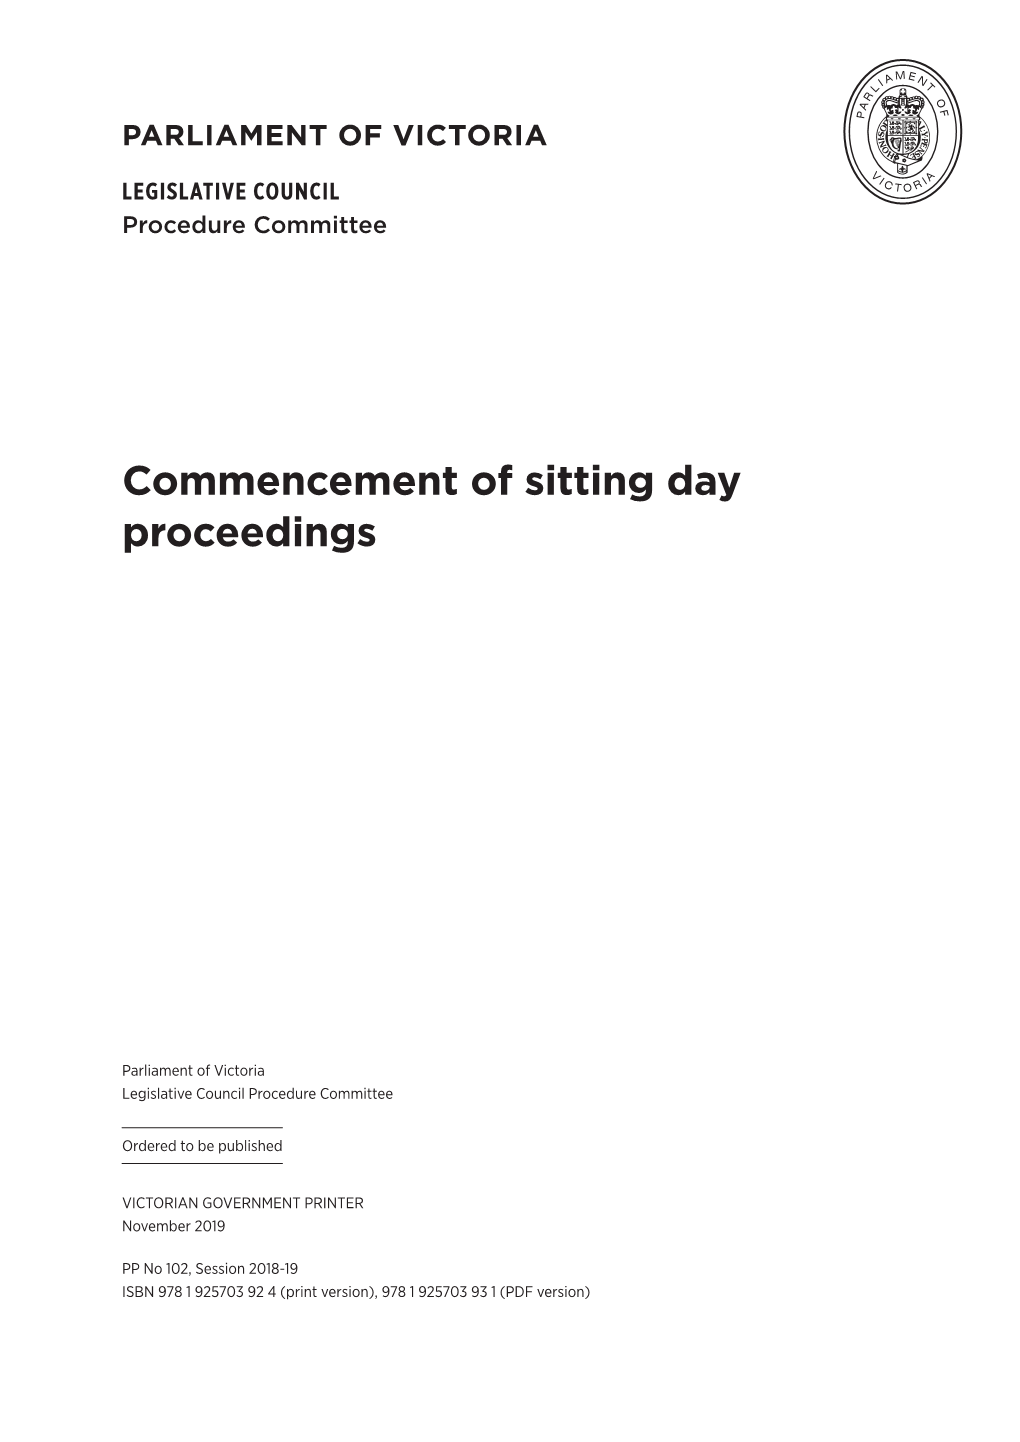 LCPC 59 01 Commencement of Sitting Day Proceedings